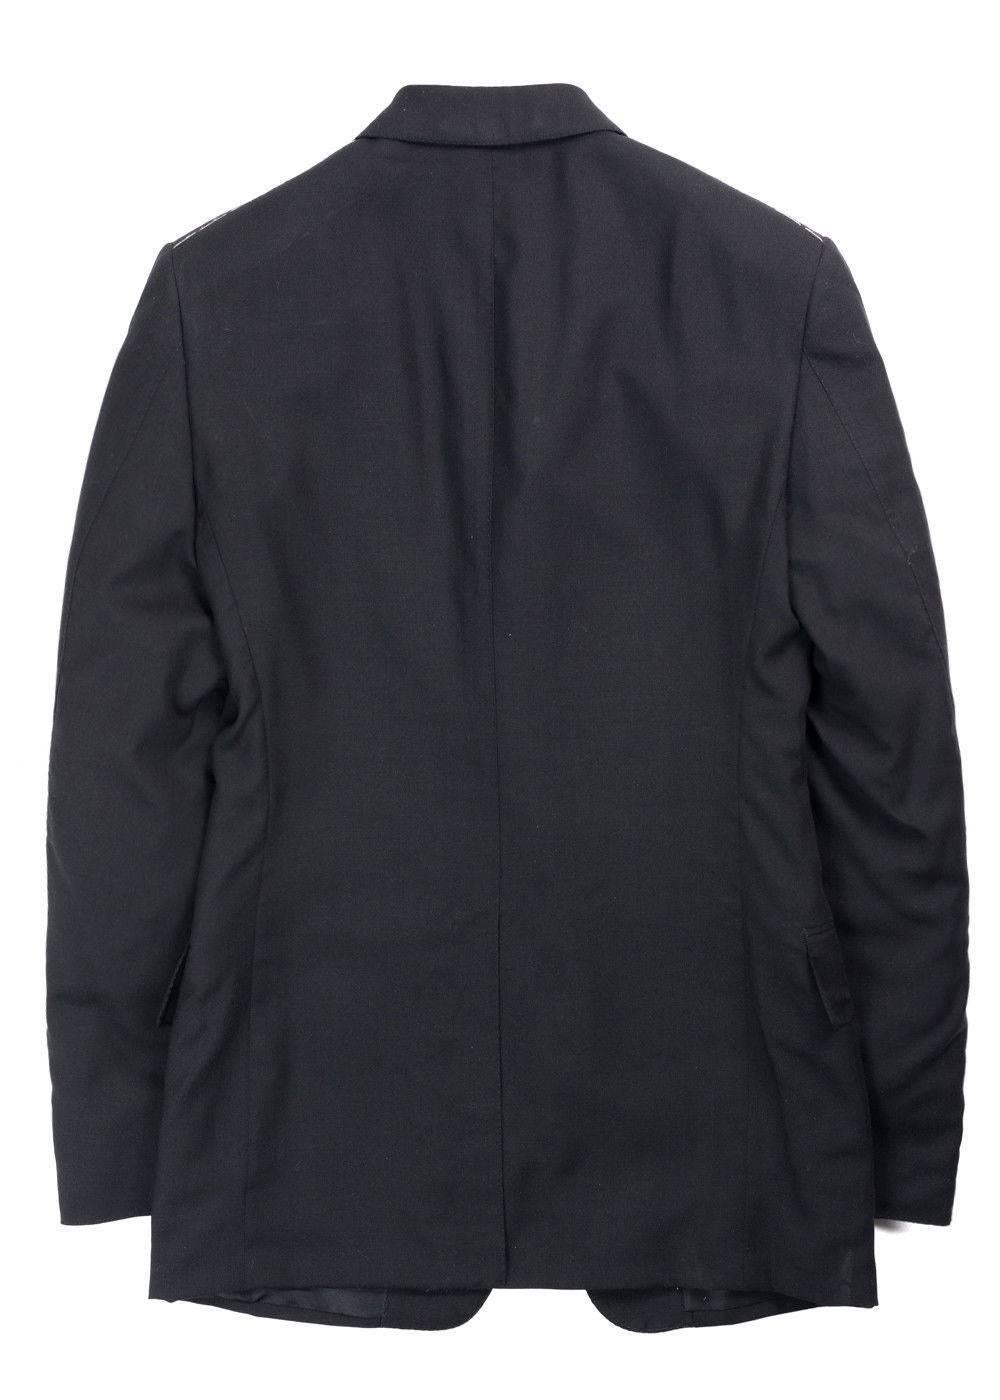 Brand New Tom Ford Shelton Jacket
Original Tags & Hanger Included
Retails in Stores & Online for $5160
Size EUR 46R / US 36 Fits True to Size


Lend a hint of effortless sophistication to your formal repertoire courtesy of Tom Ford's Shelton base